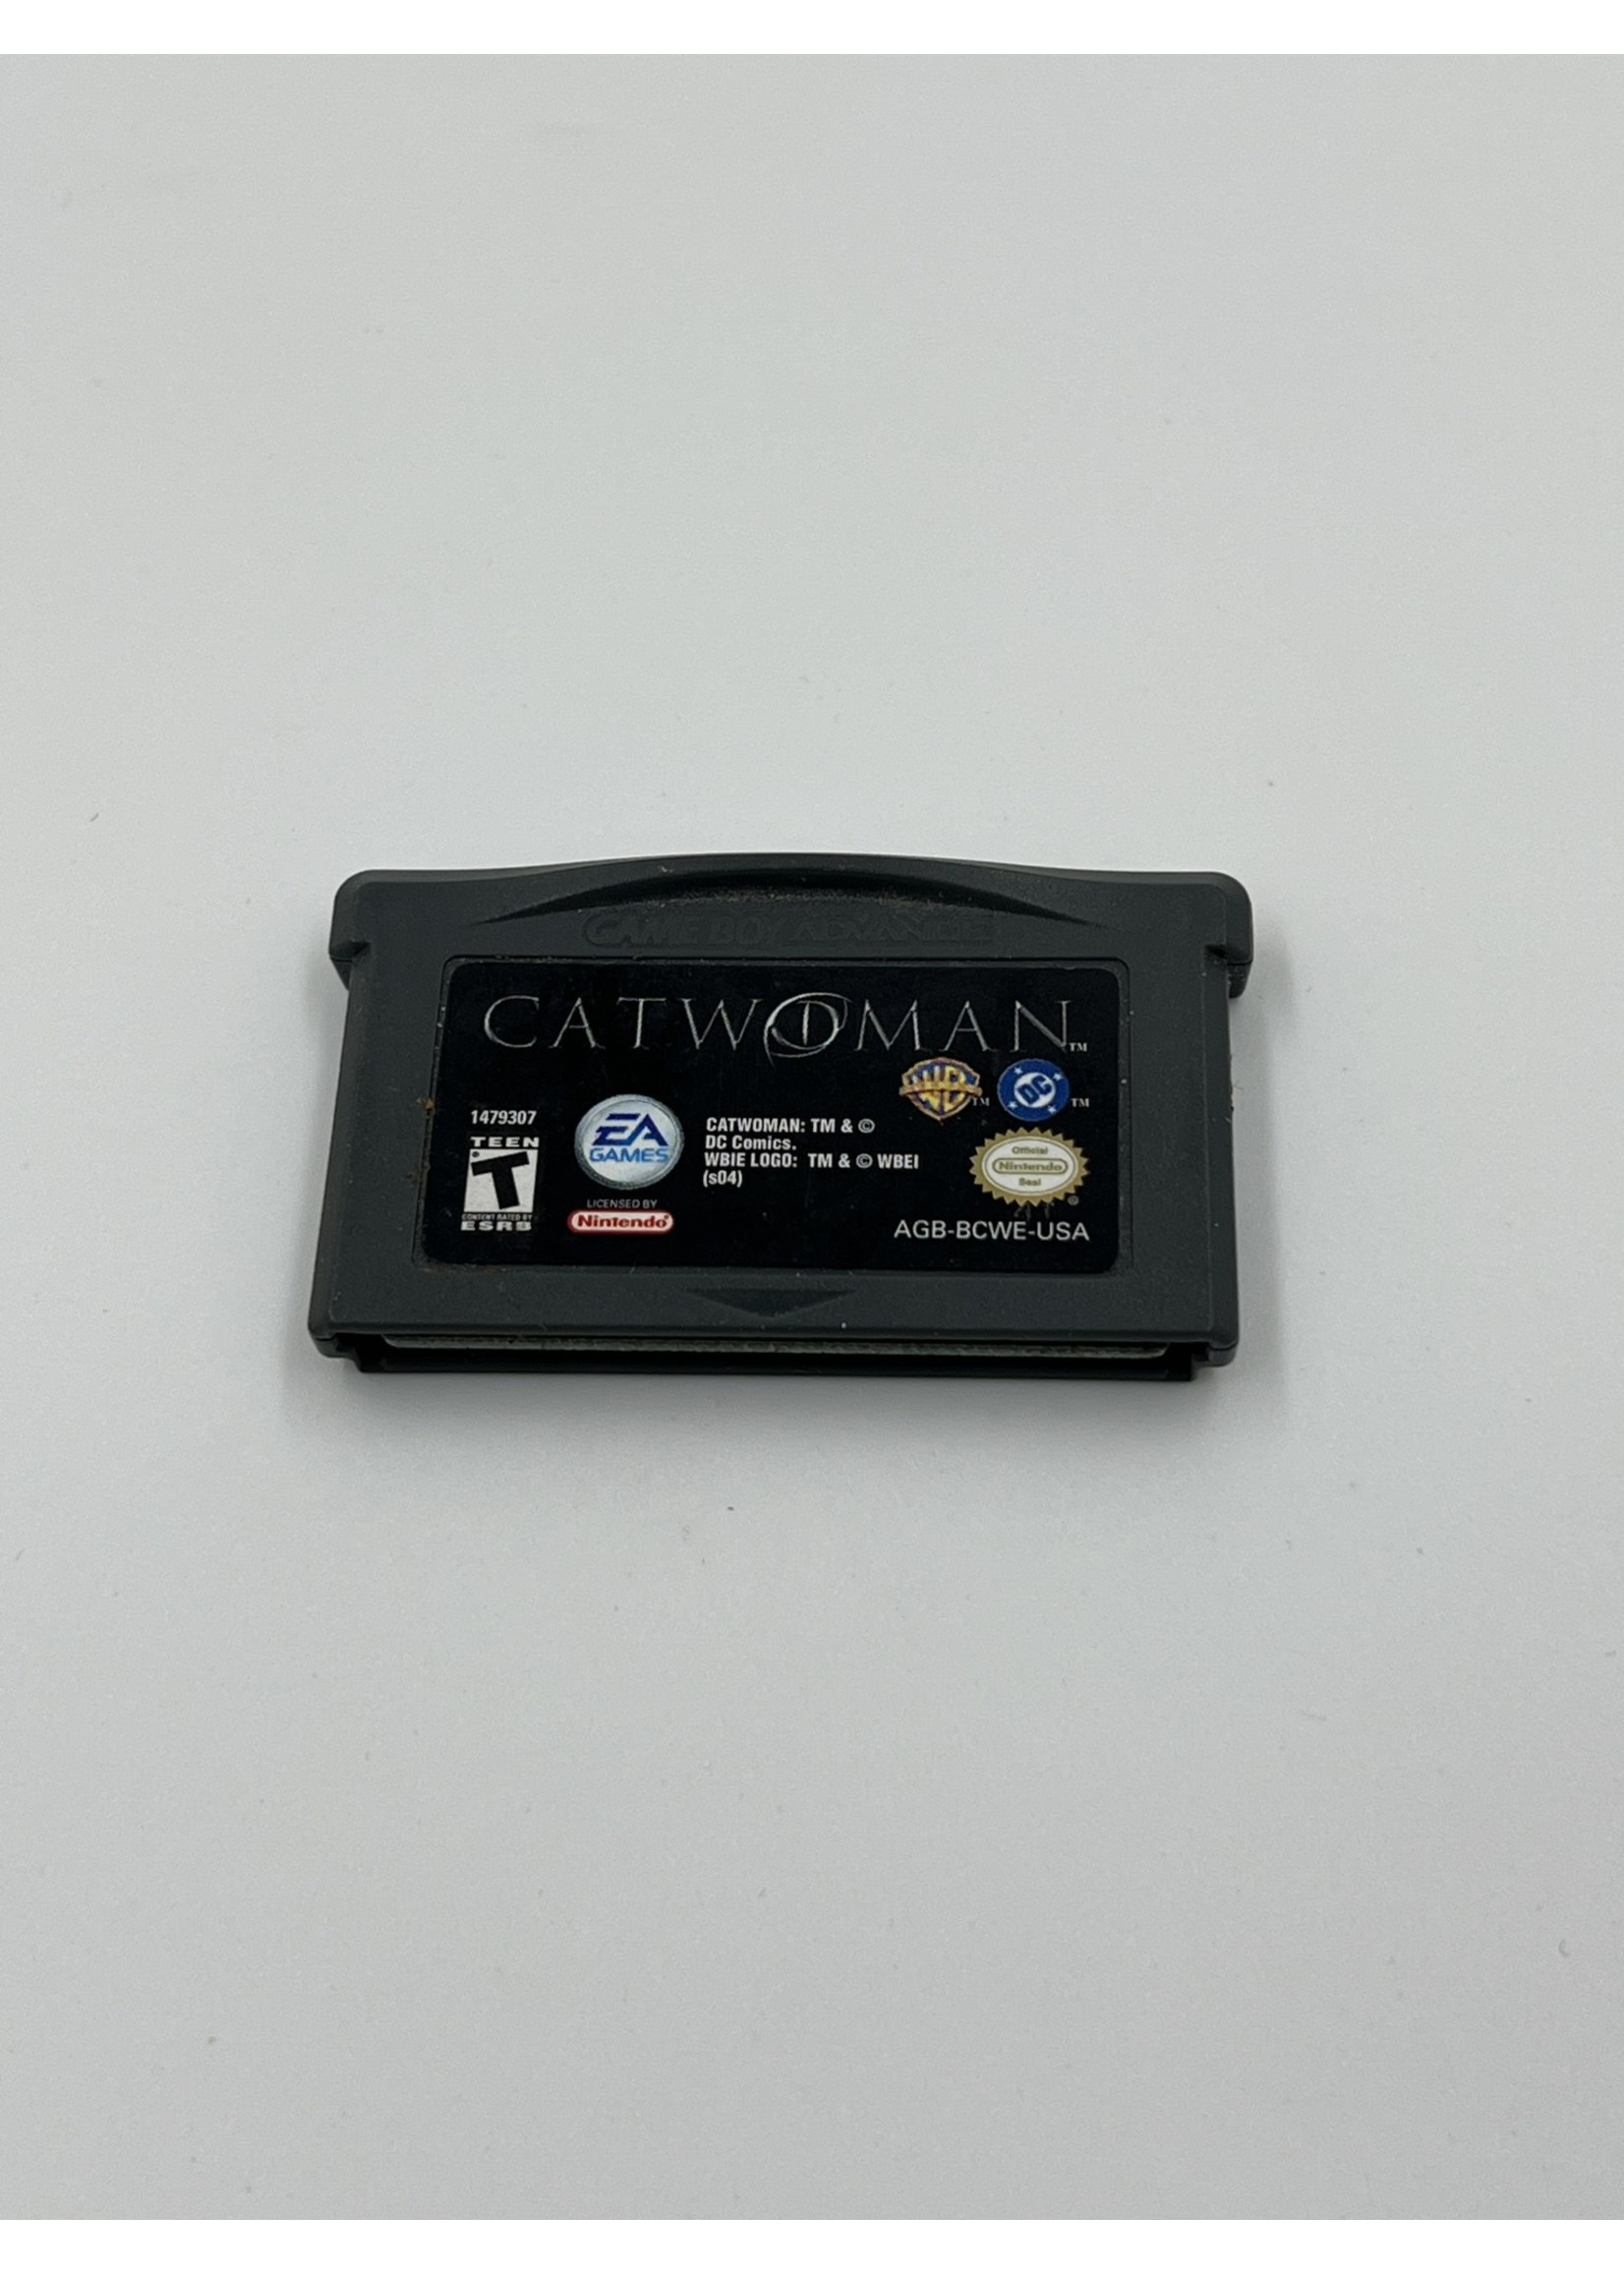 GameBoy Advance Catwoman Gba